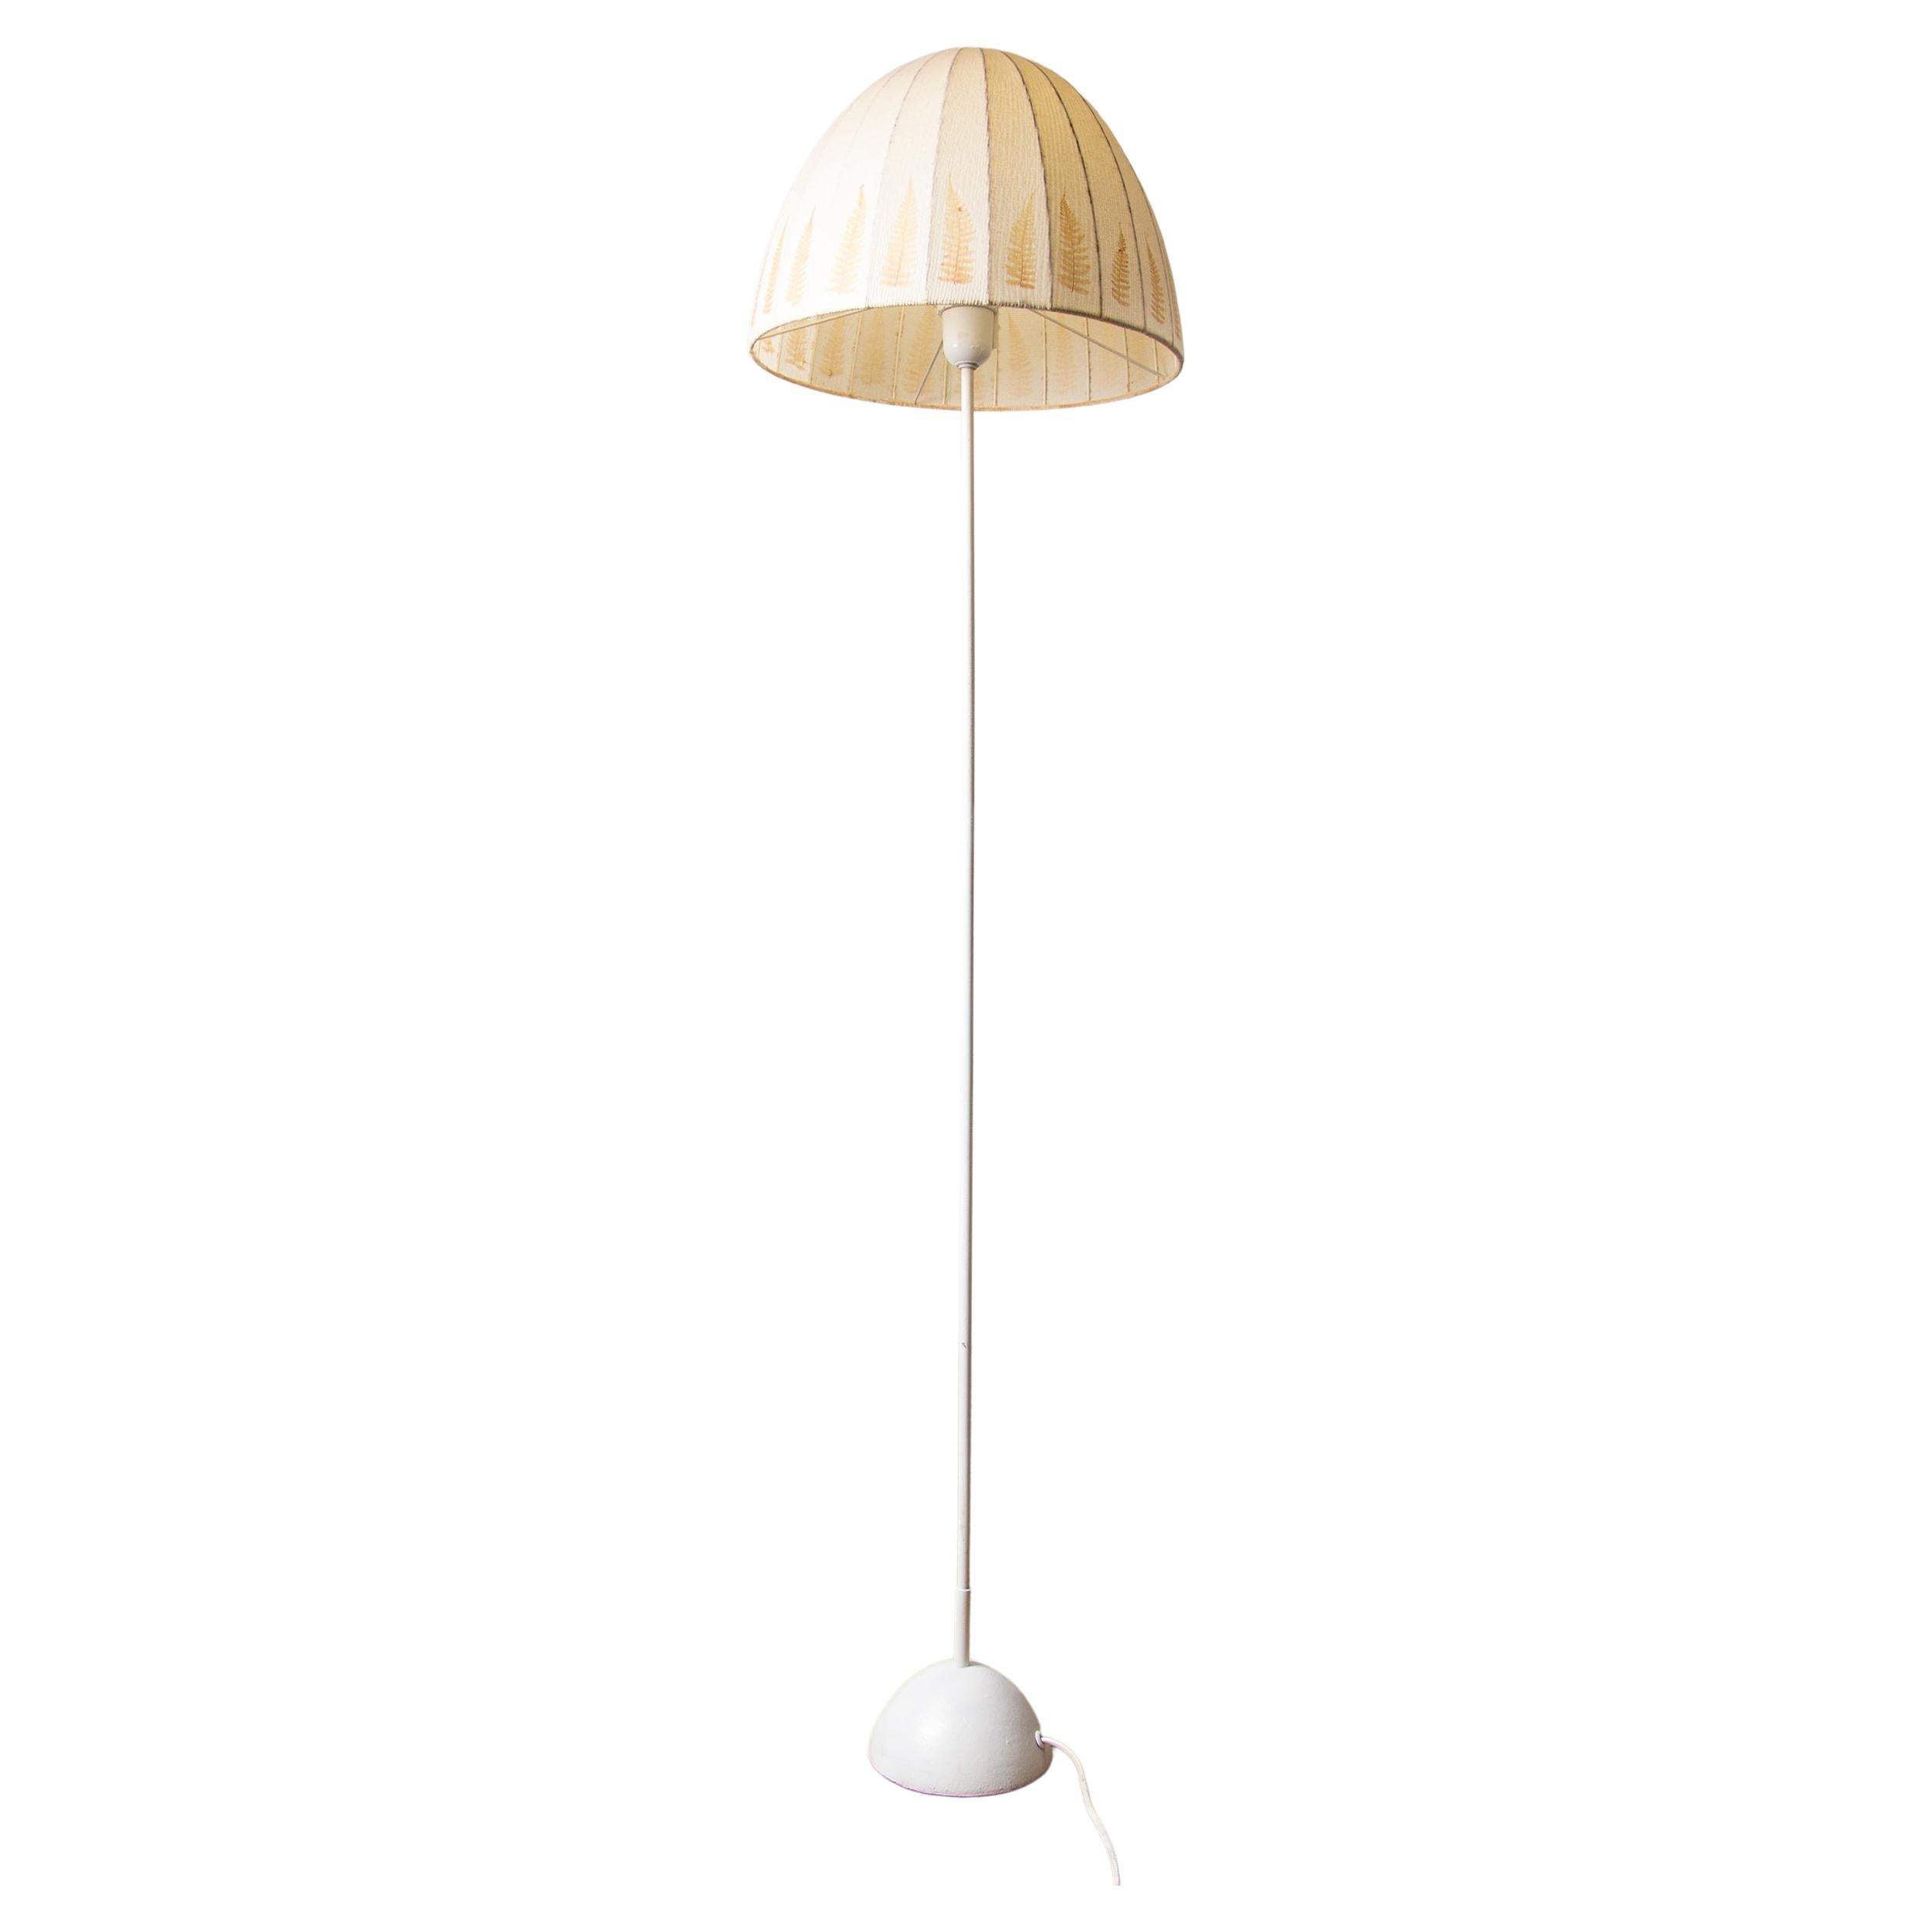 Metal Floor Lamp number G37 by Hans Agne Jakobson 1960. For Sale